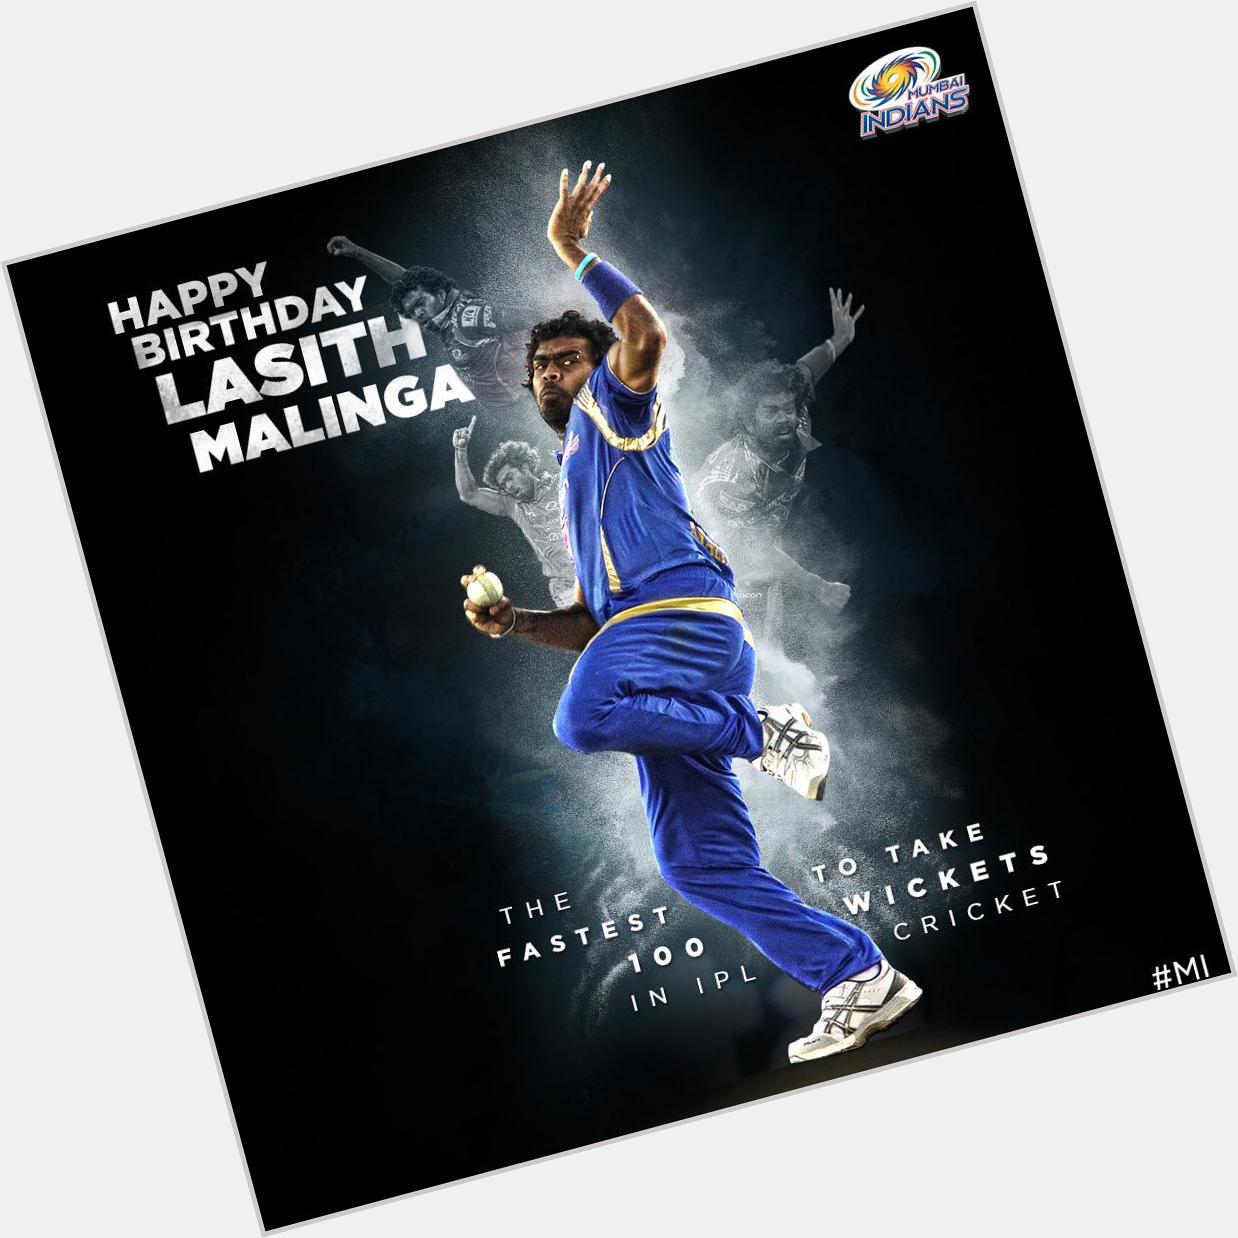 Happy birthday Lasith Malinga, fastest to take 100 wickets in Paltan, tell us your best Slinga moment for 